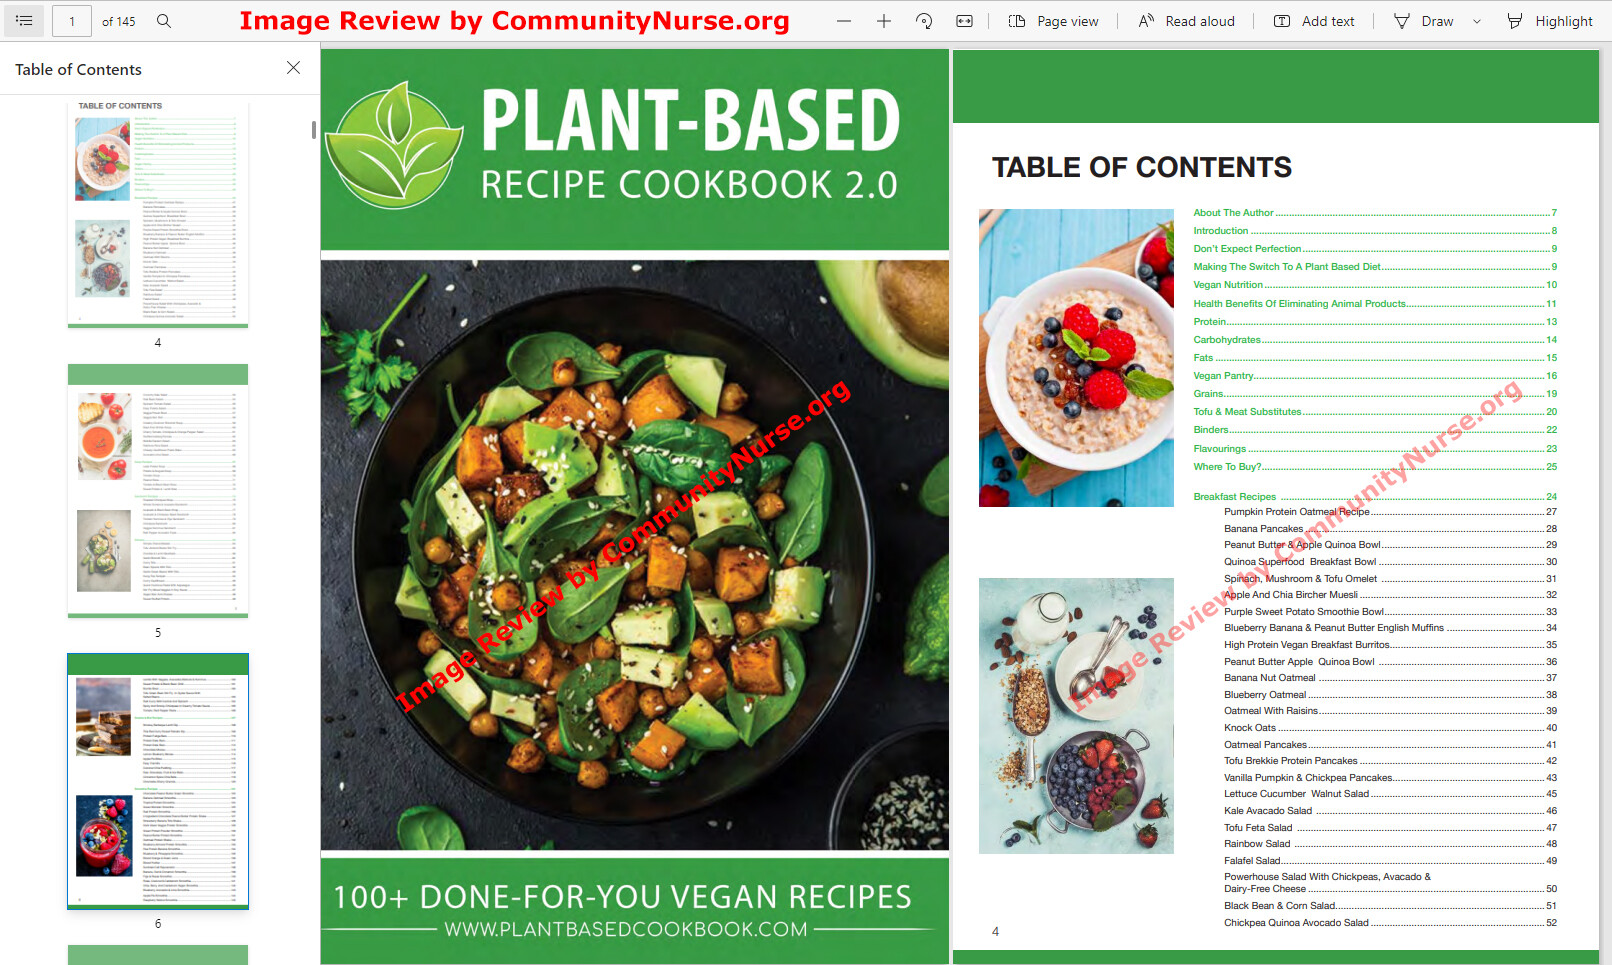 Recipe Cookbook 2.0 table of contents